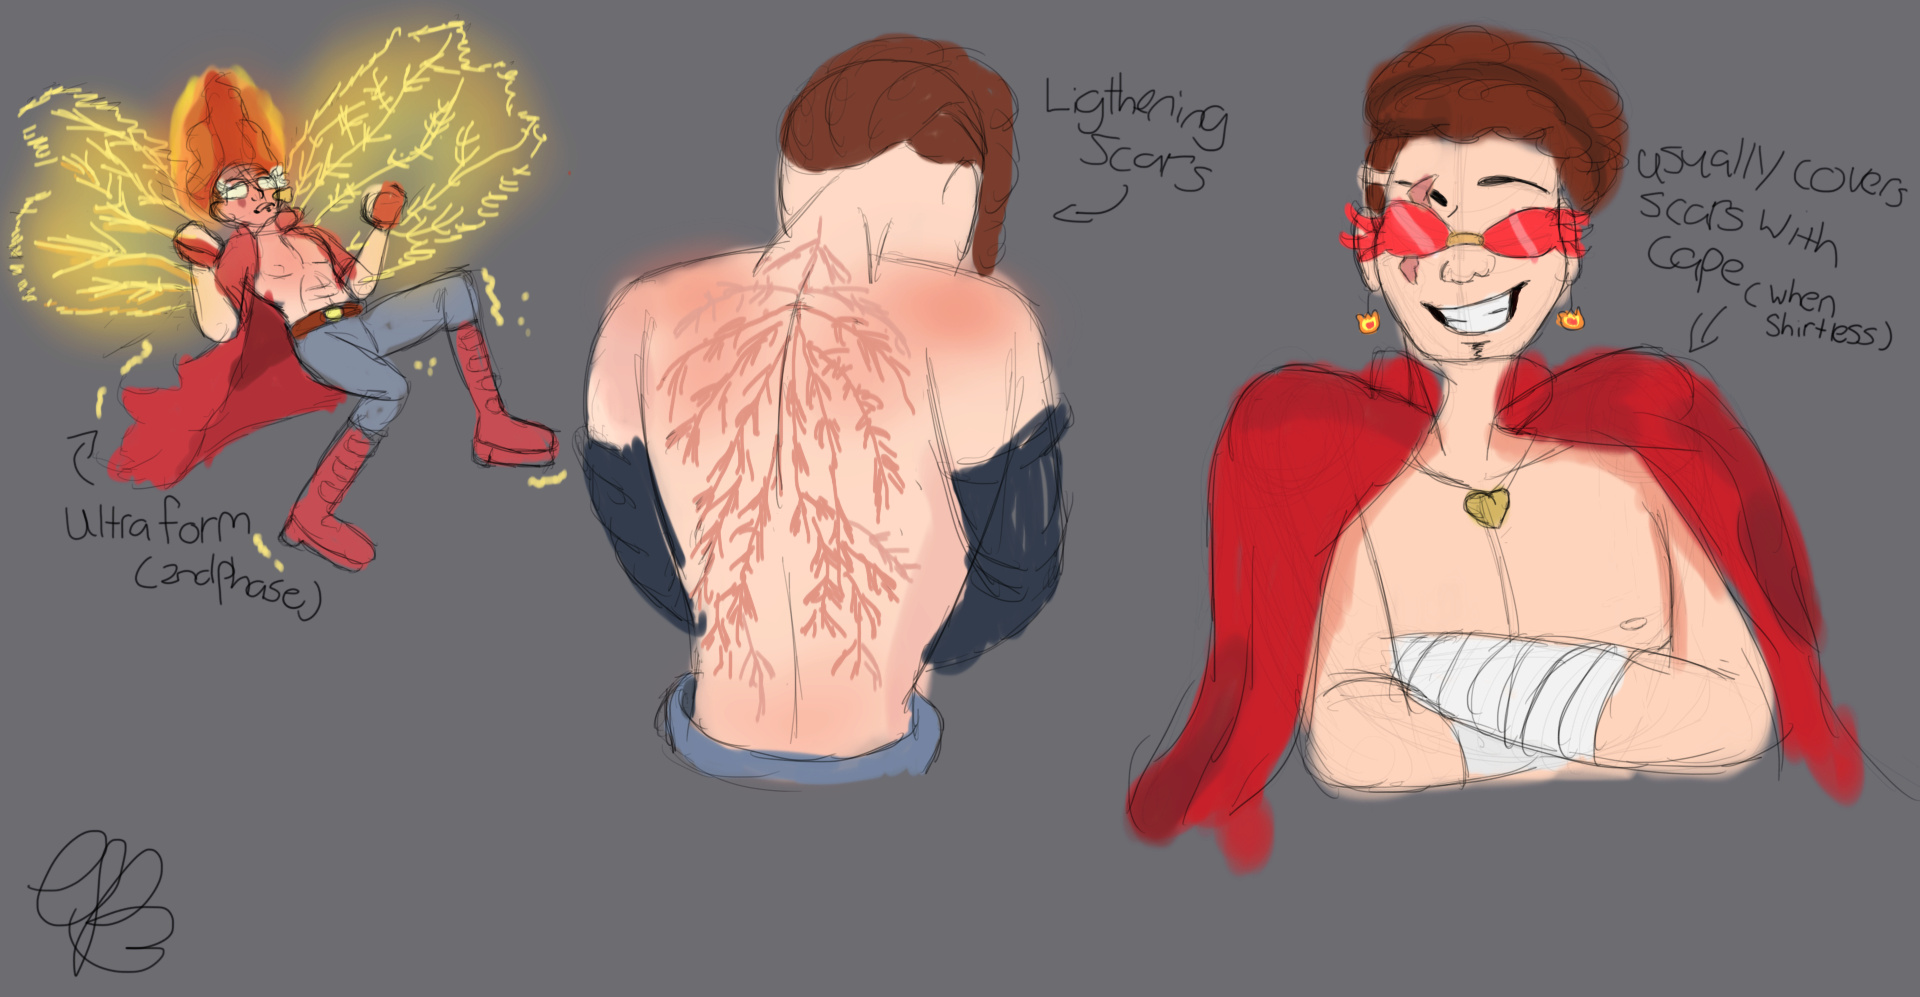 These are the scars FB got when he first gain his ligthening/electric powers, he's a bit sore about them since it reminds him of the day his mom passed